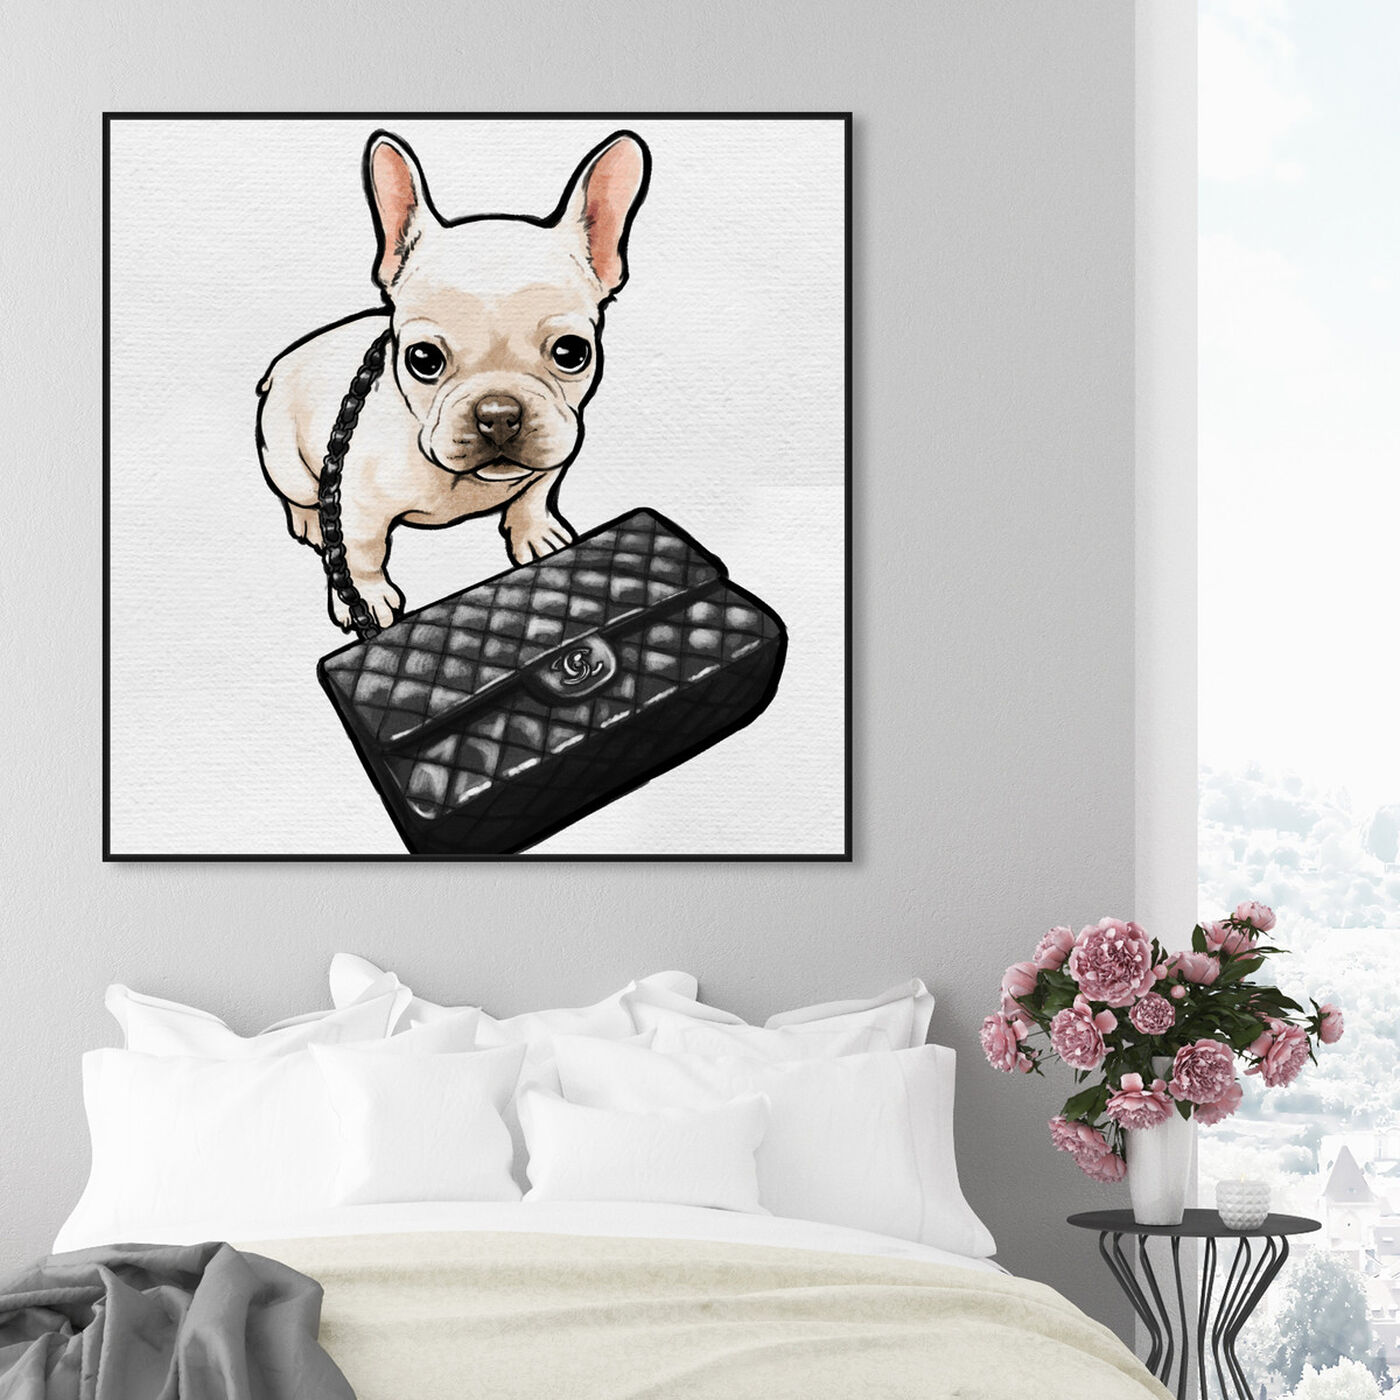 Hanging view of Classy Frenchie featuring animals and dogs and puppies art.